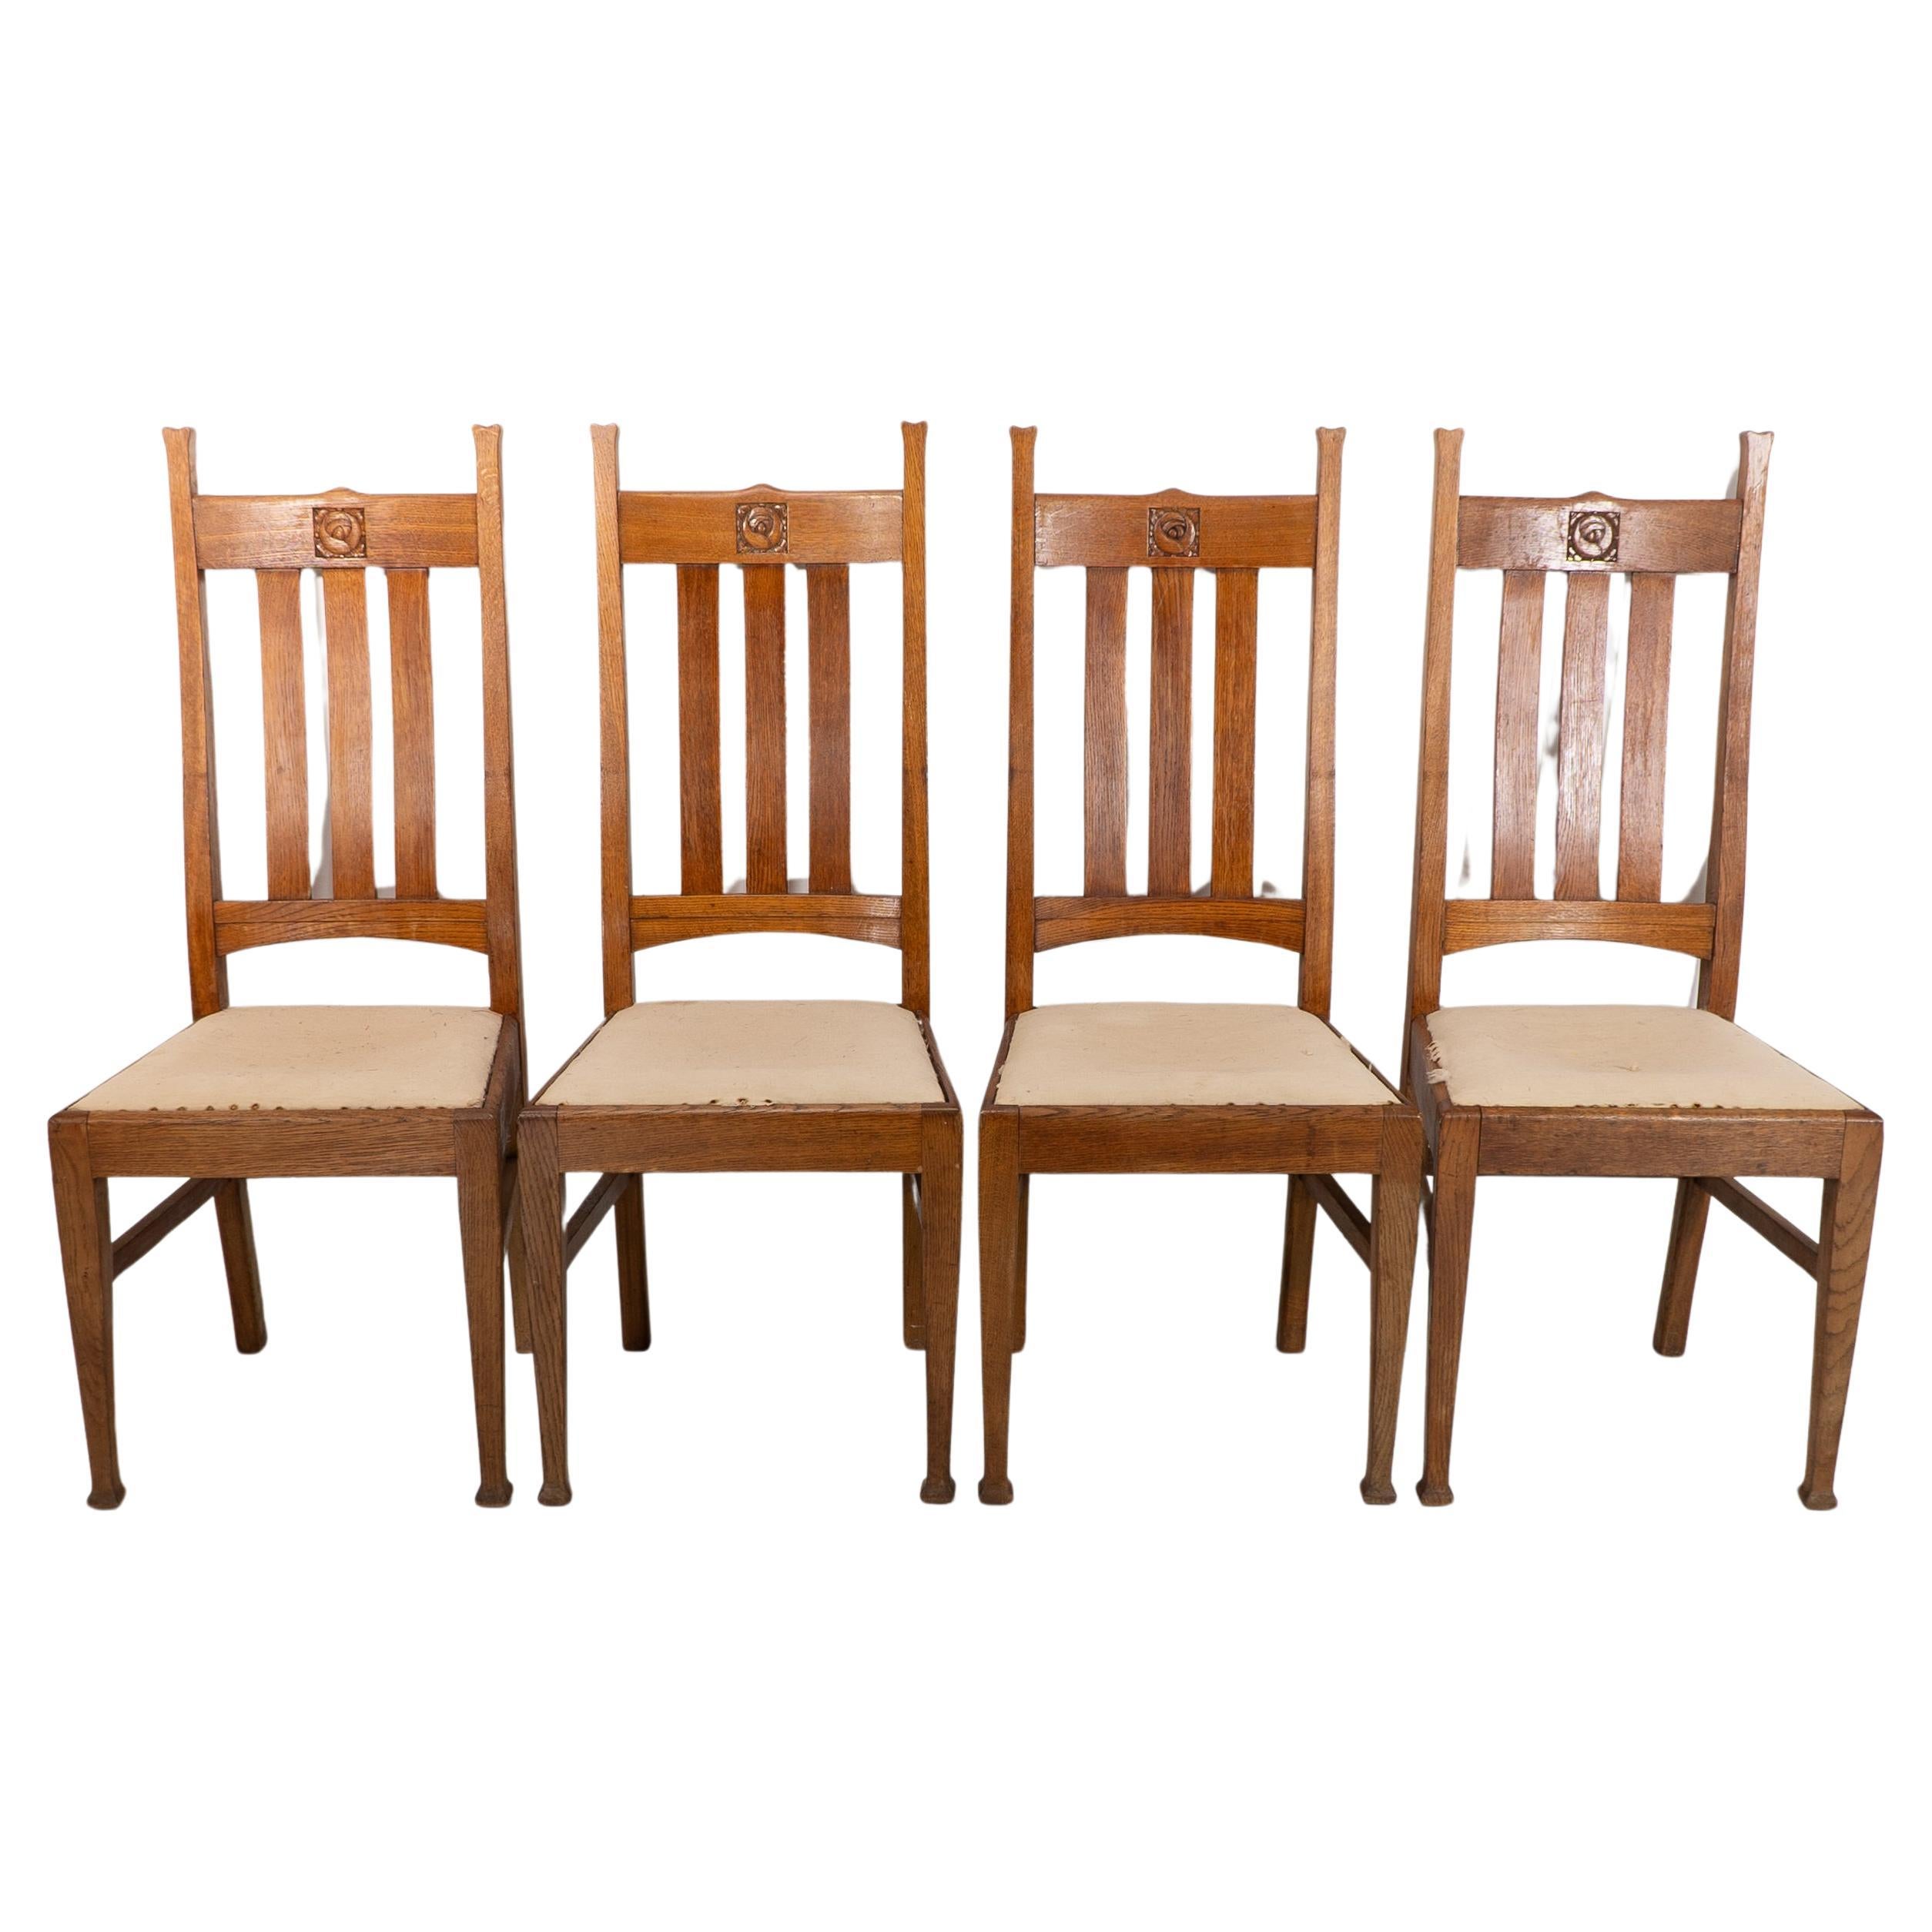 E A Taylor for Wylie & Lochhead. A set of four Arts and Crafts oak dining chairs